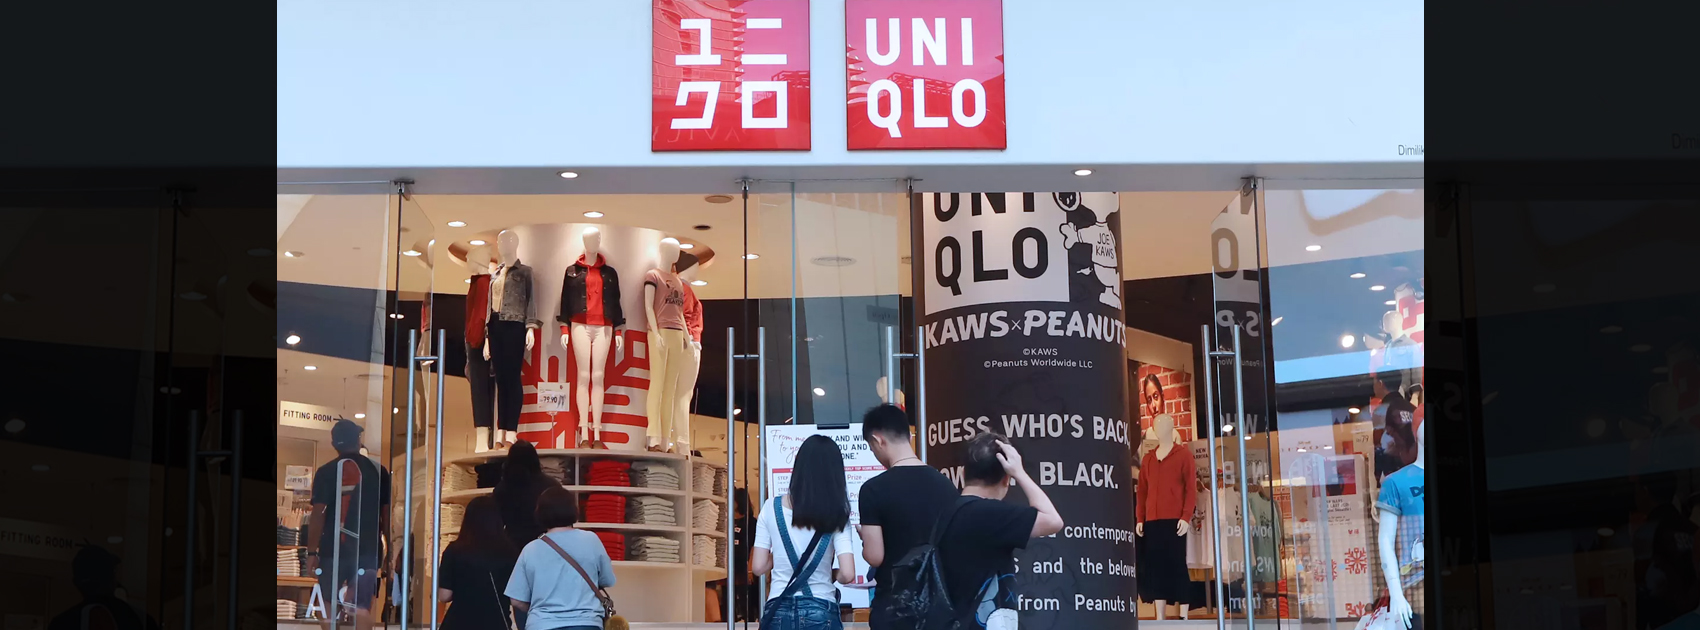 UNIQLO Founder Takes Step Towards Women Empowerment,Amid Gender Gap Issue In Japan,Startup Stories,Women Empowerment,Fast Retailing Founder Tadashi Yanai,popular retailing company Fast Retailing,CEO of UNIQLO,Japan Prime Minister Shinzo Abe,UNIQLO Founder Tadashi Yanai